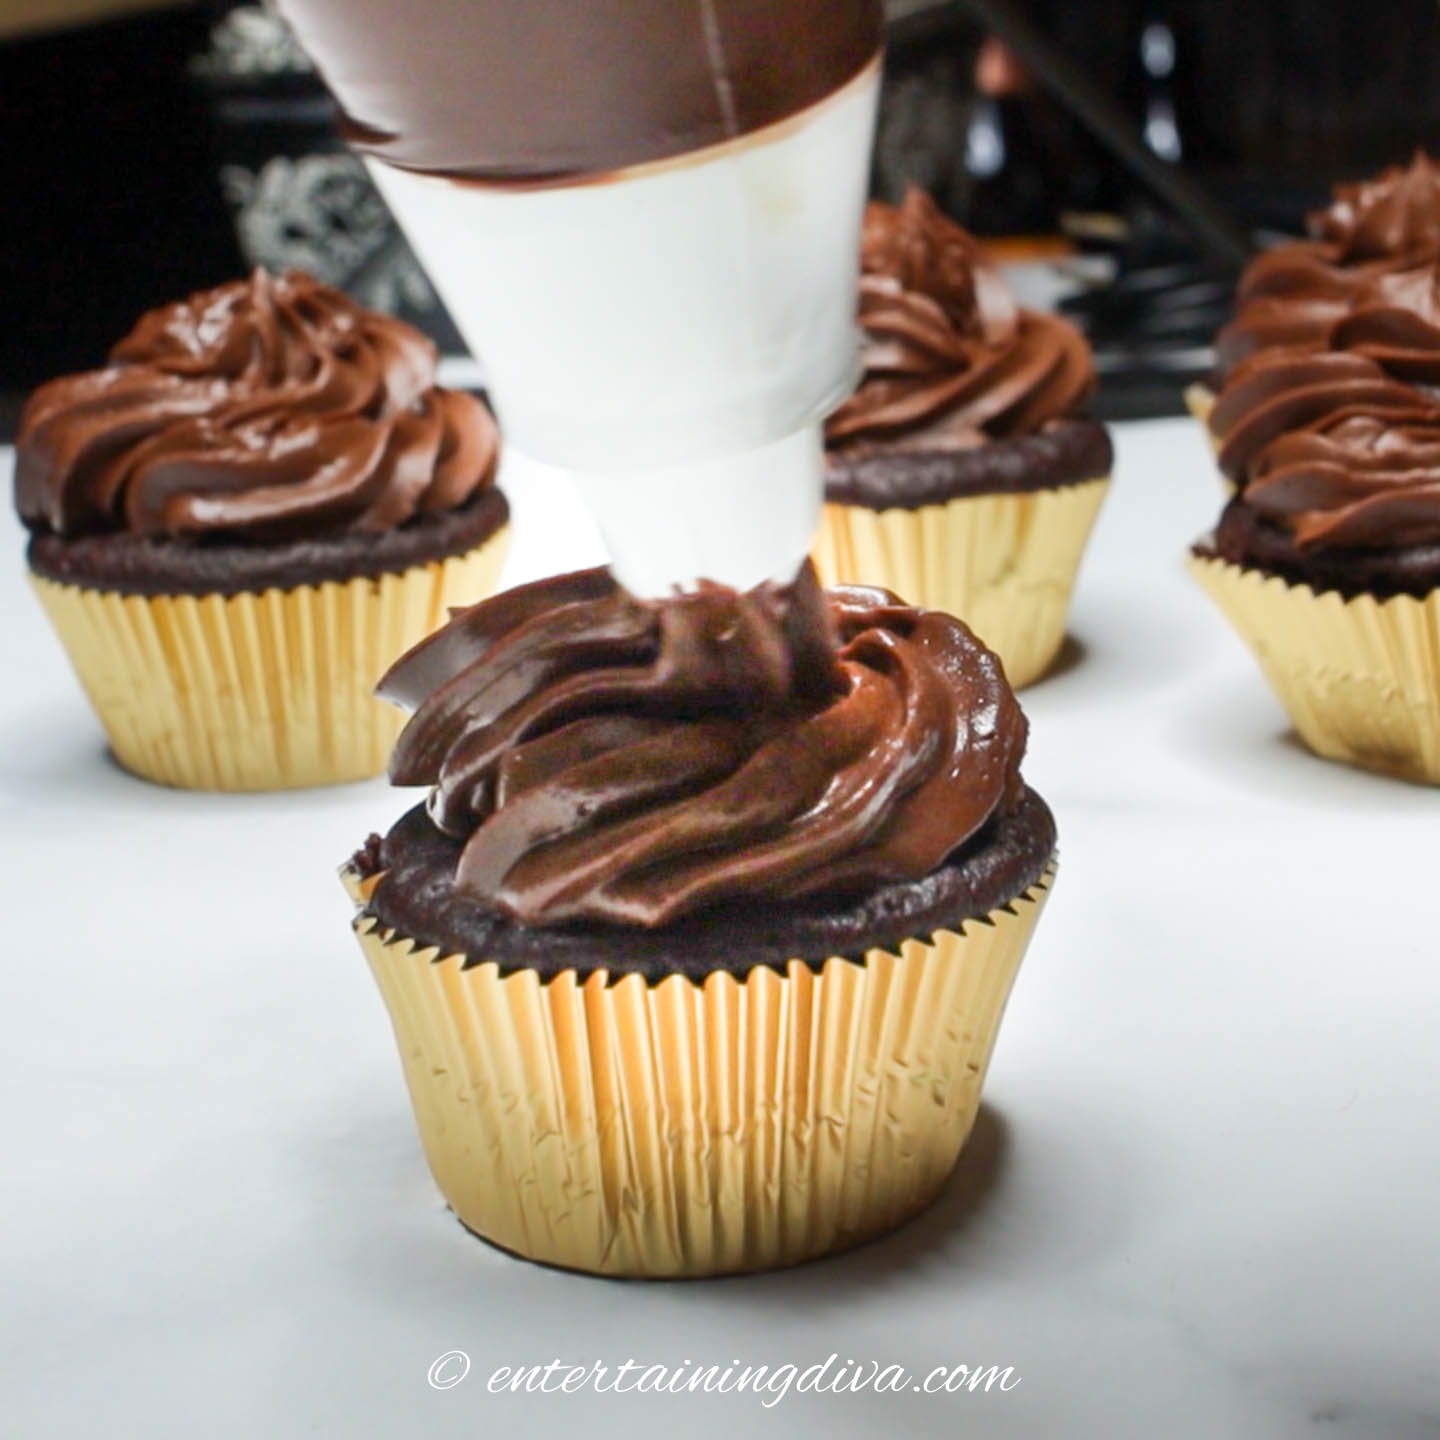 Chocolate icing being piped onto a cupcake